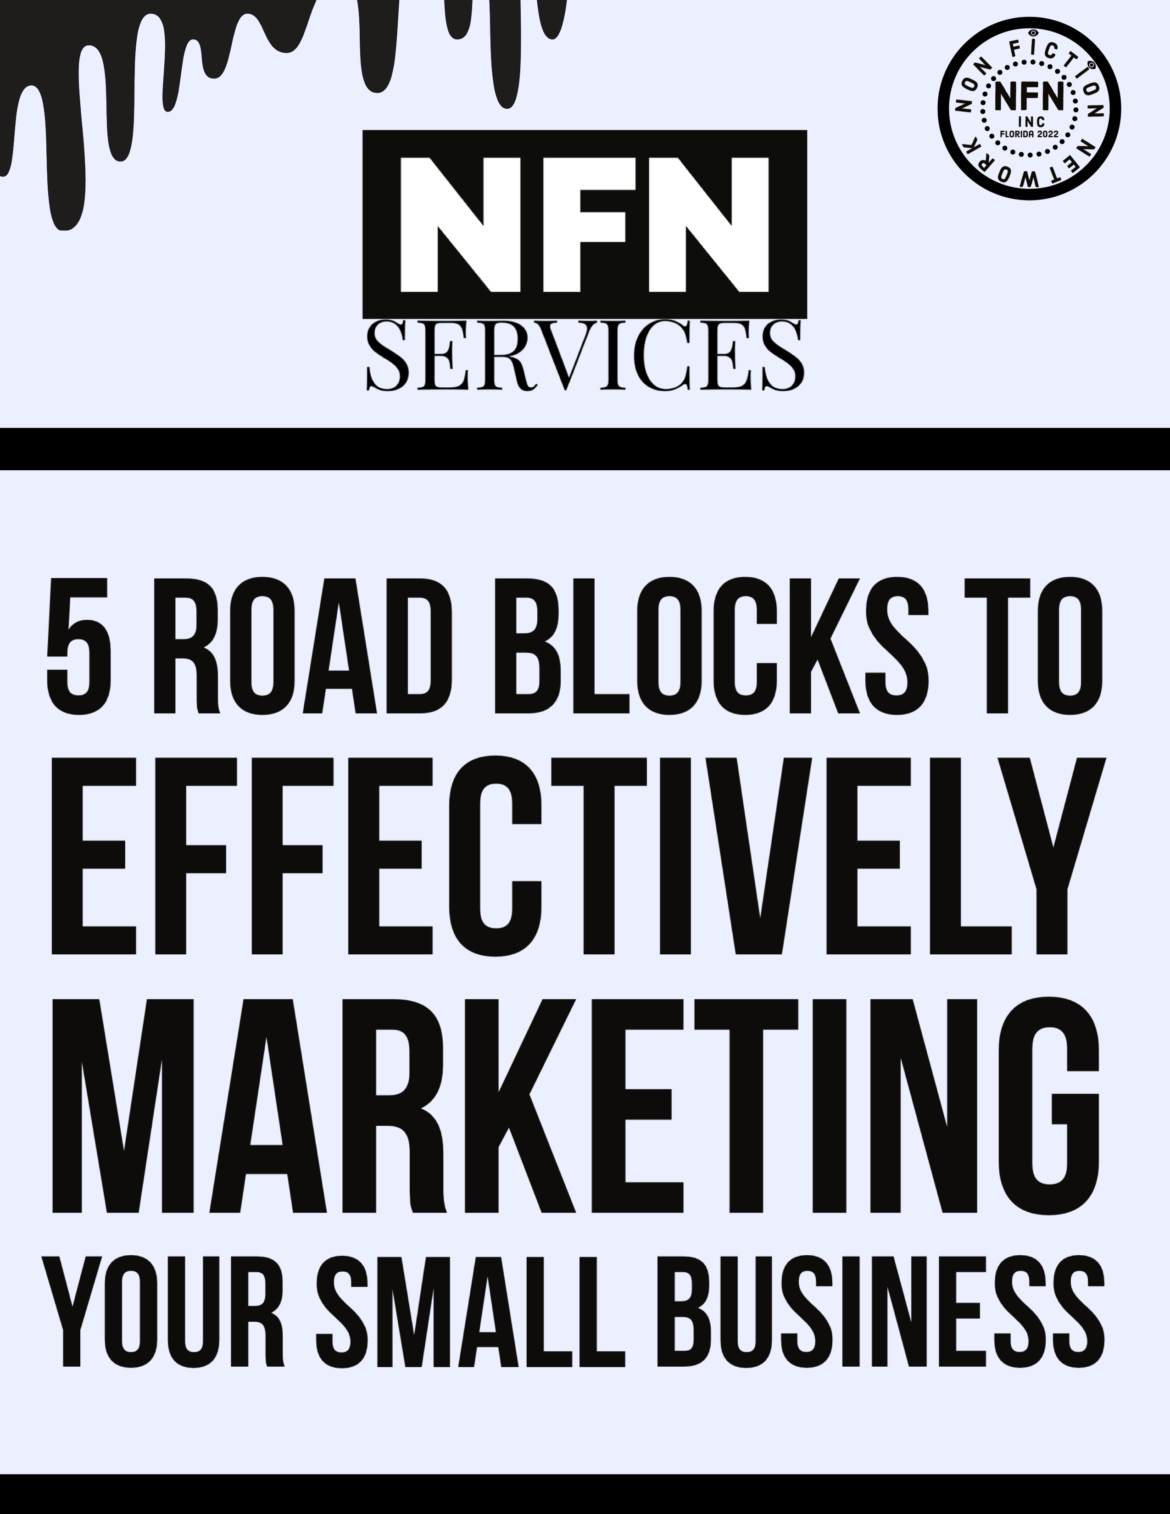 5 Roadblocks To Effectively Advertising Your Small Business